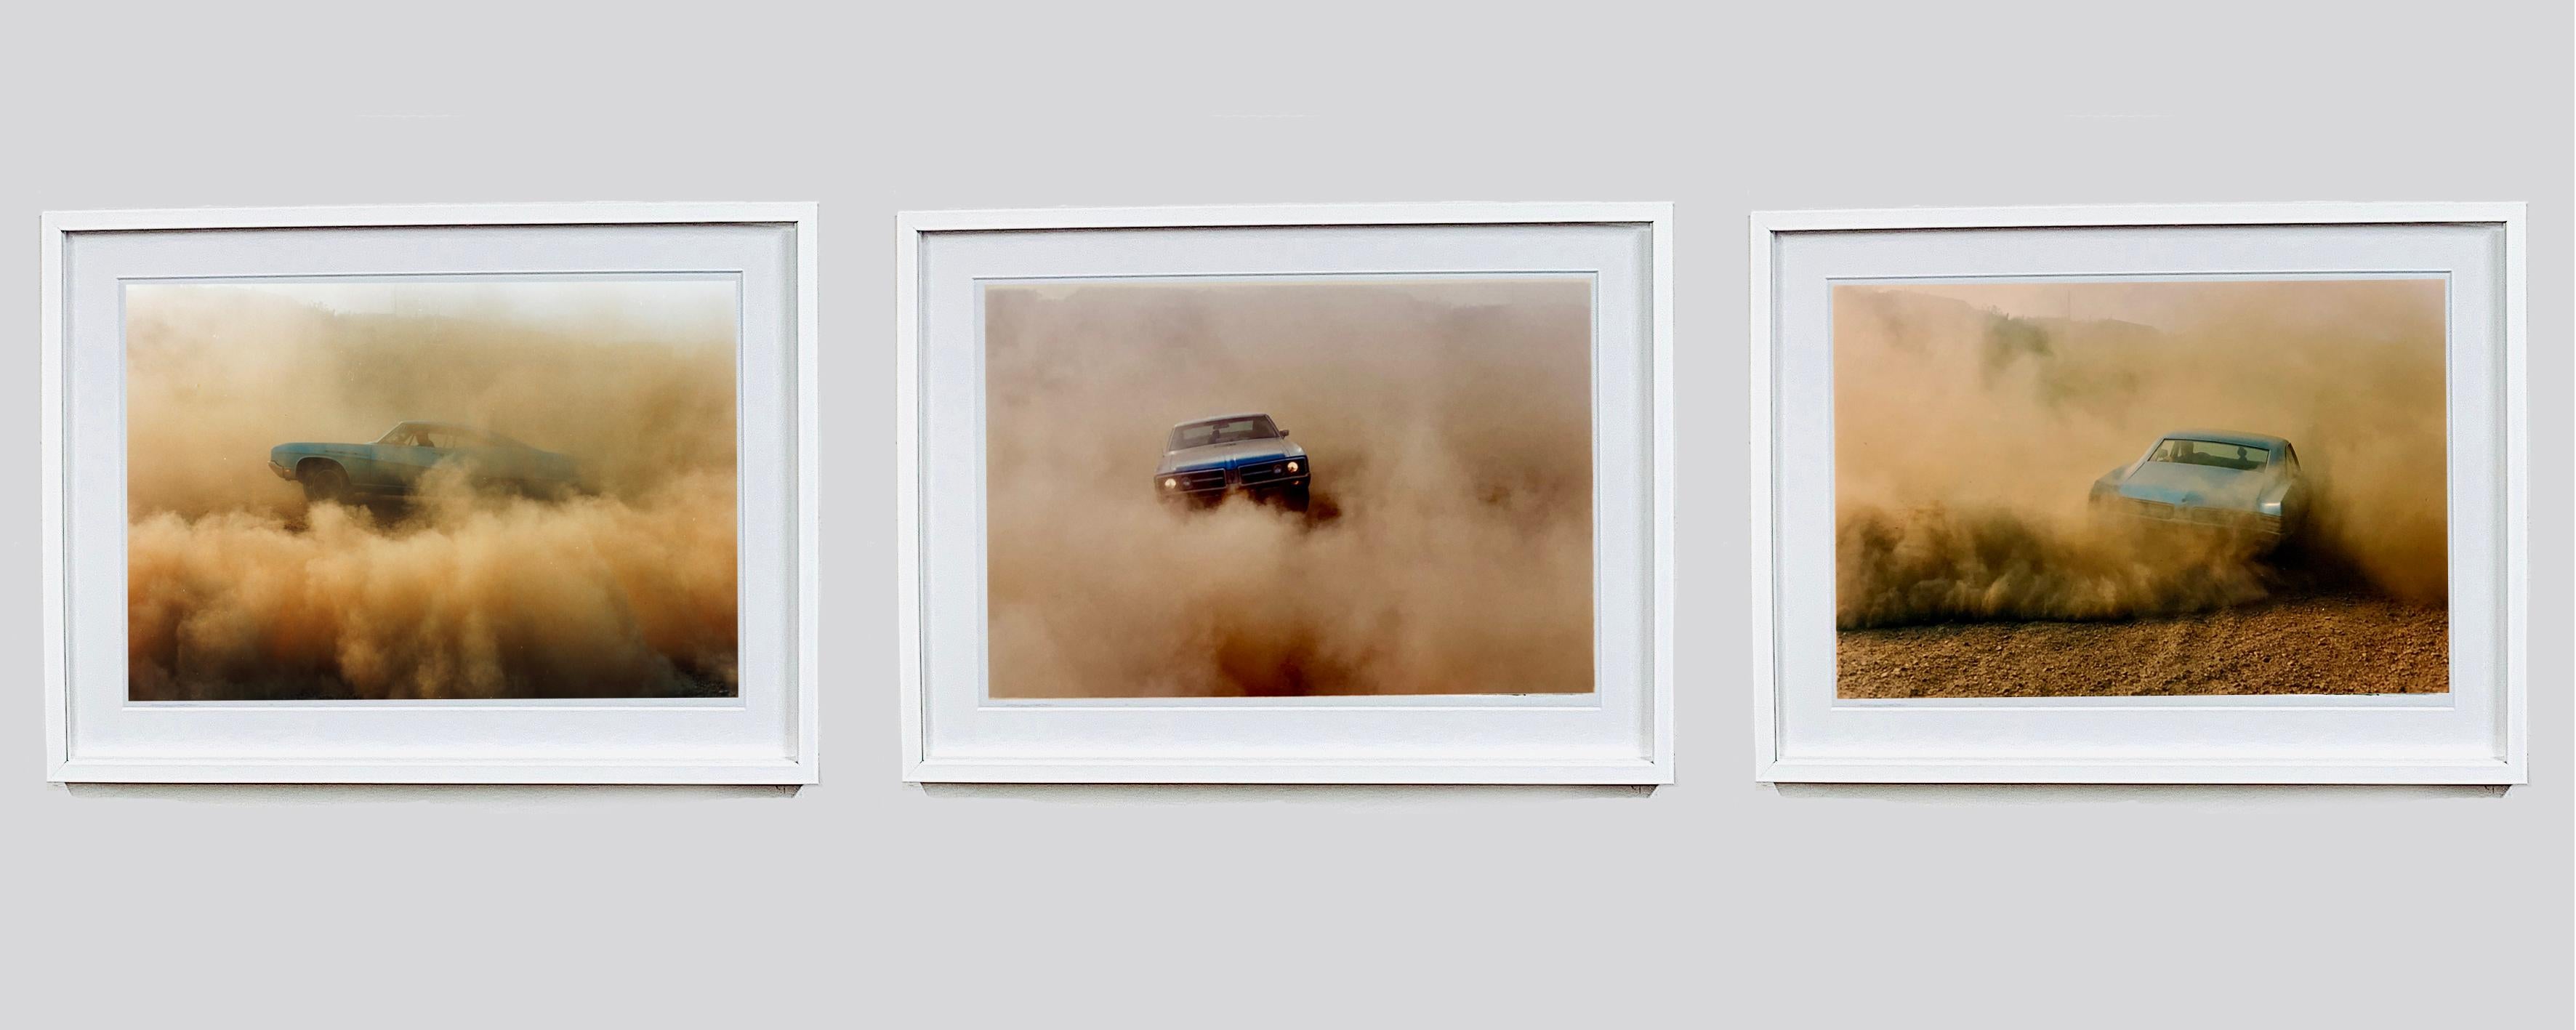 Buick in the Dust III, Hemsby, Norfolk - Color Photography of a Car For Sale 4